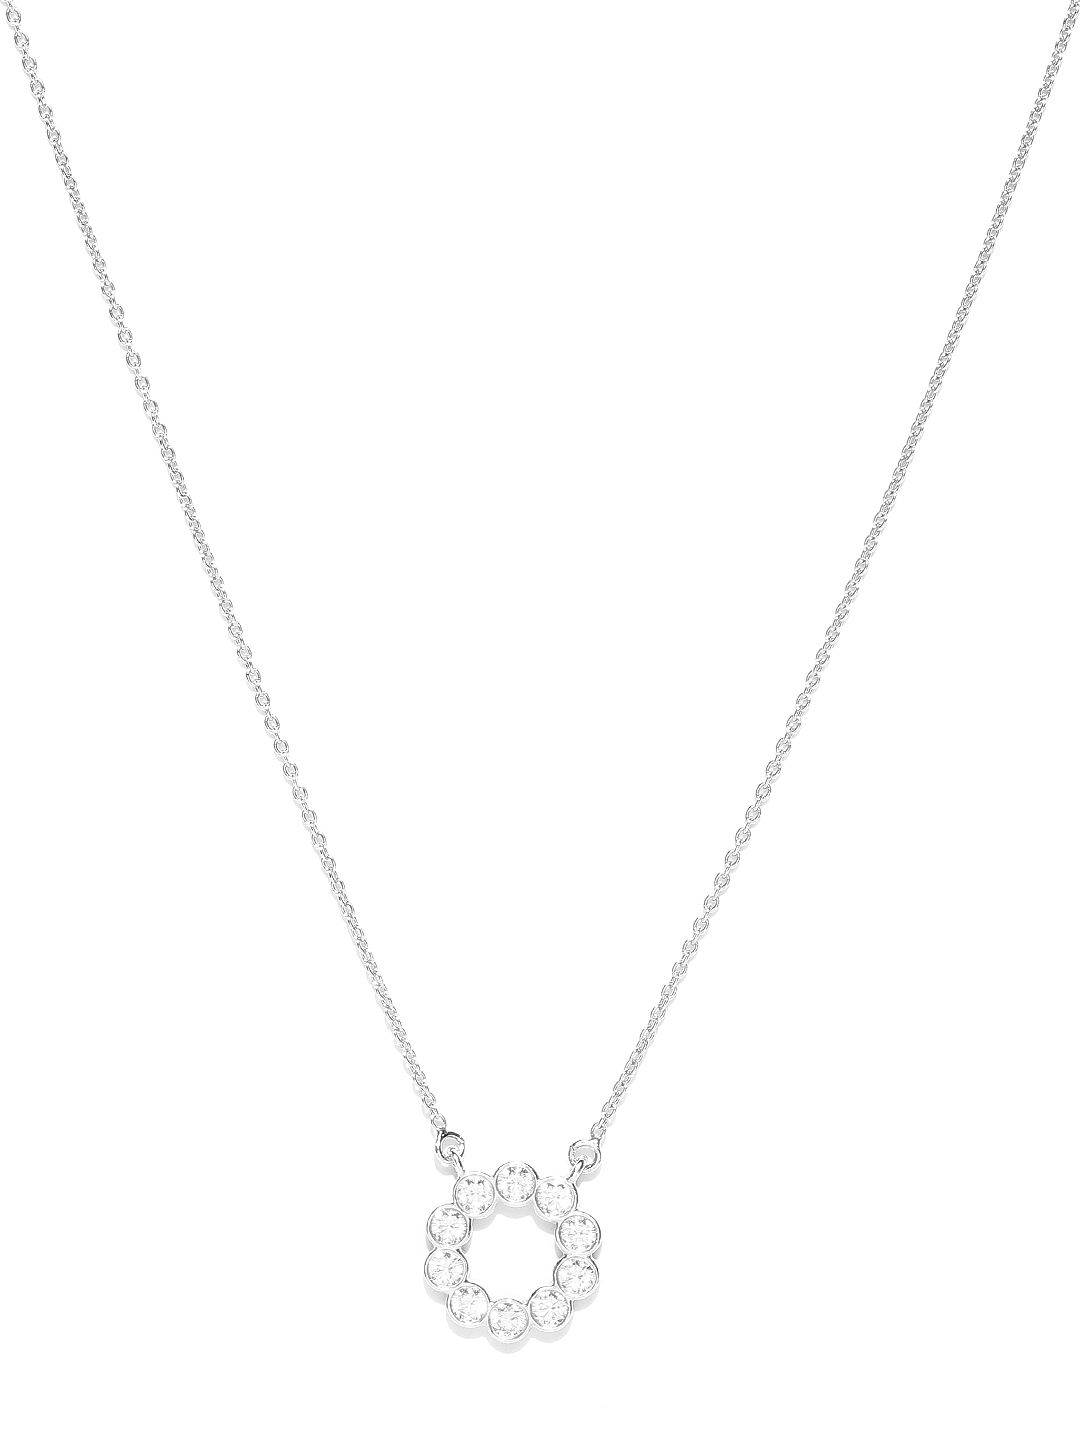 Carlton London Rhodium-Plated 925 Sterling Silver Collar Necklace Price in India